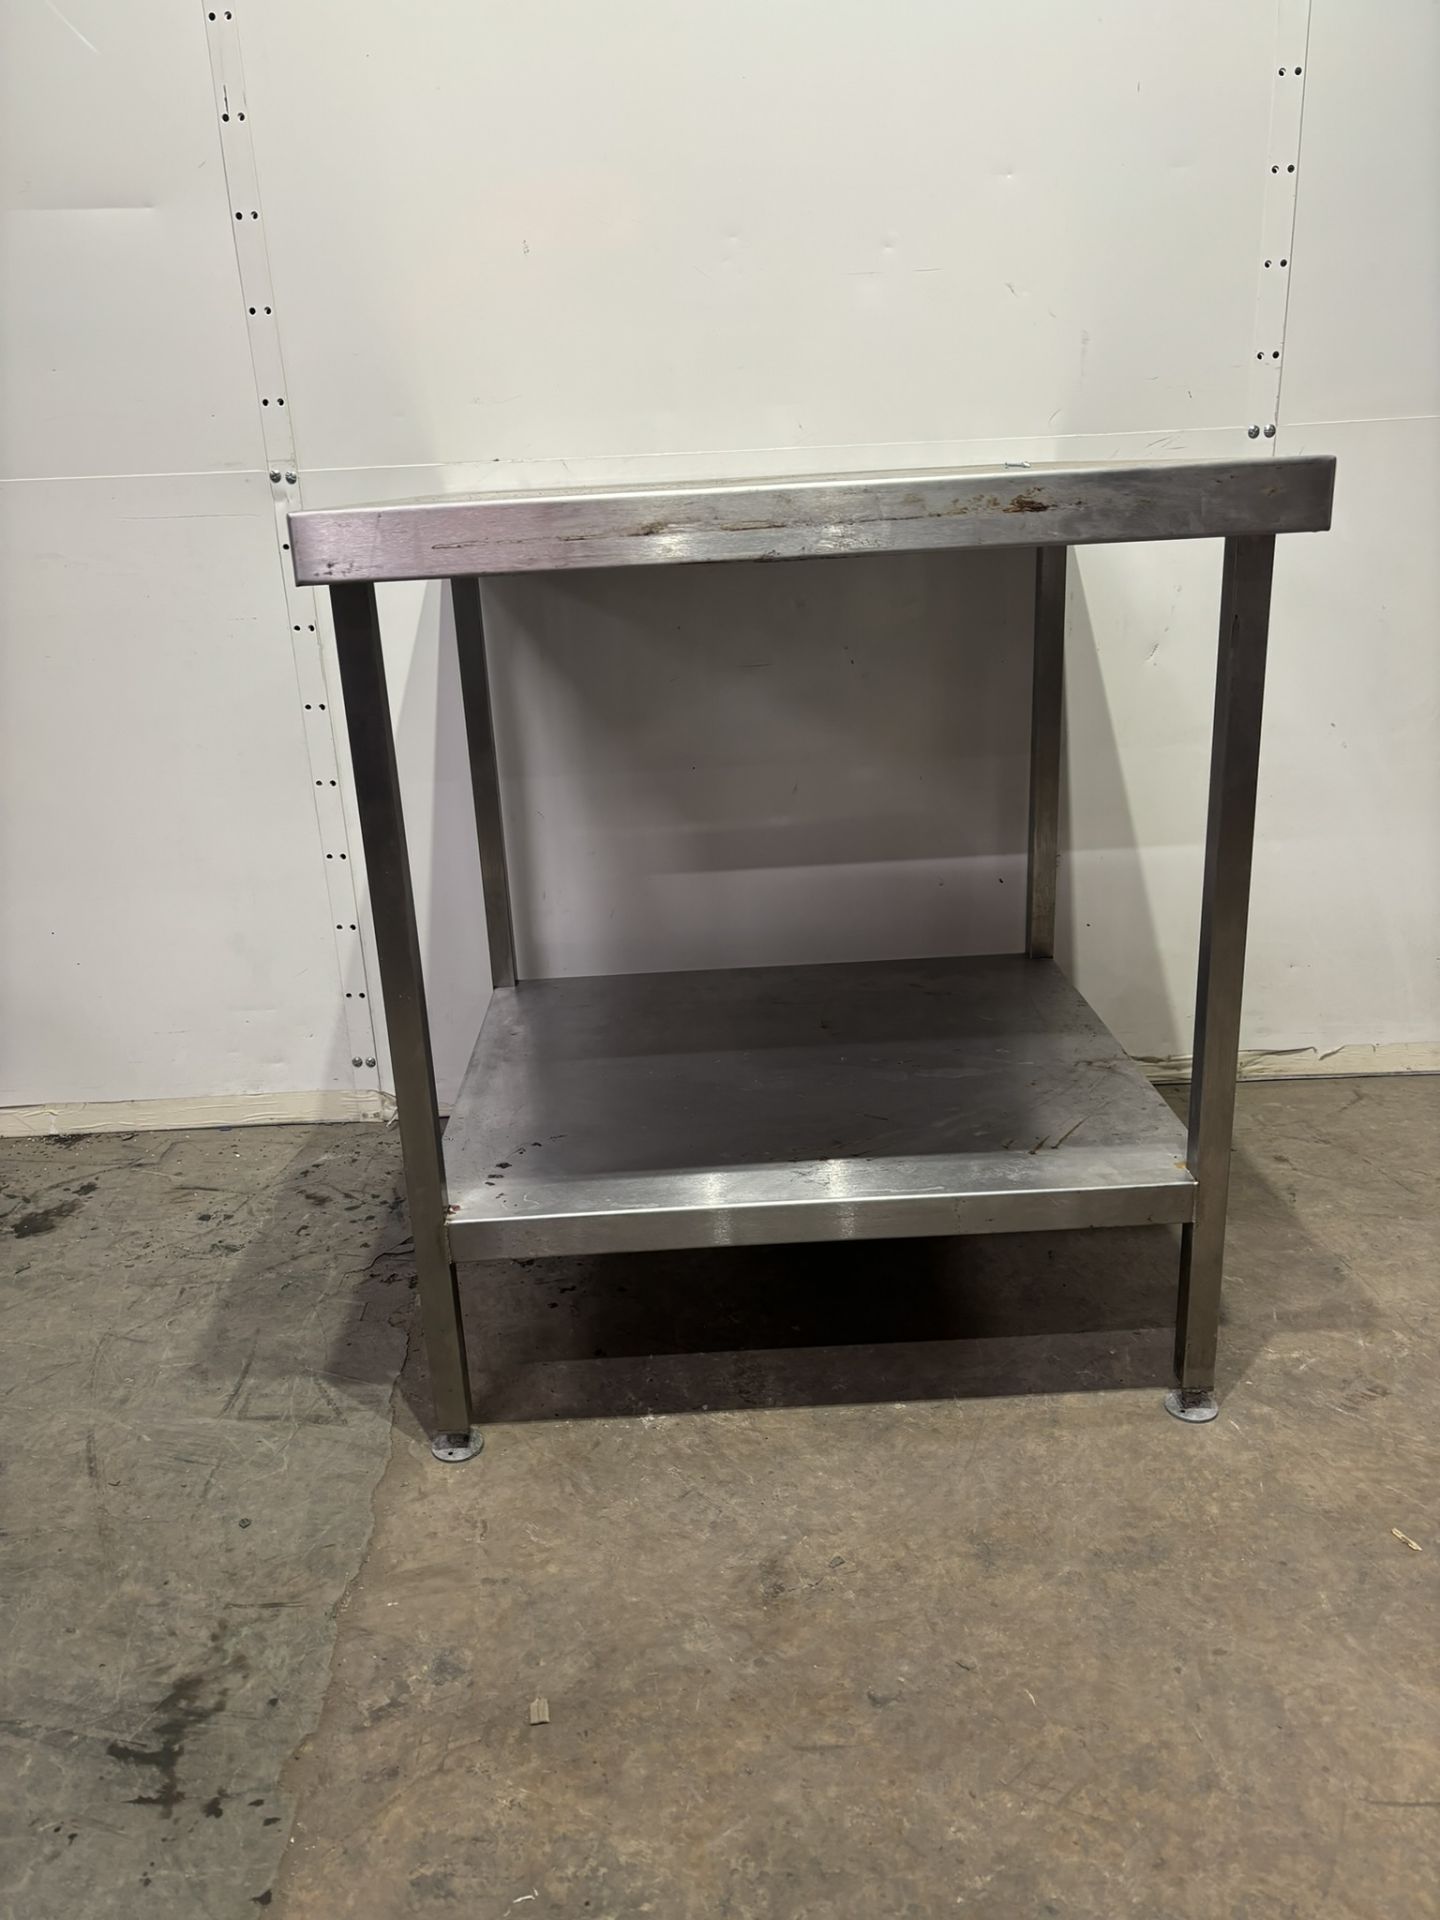 Commercial Stainless Steel Catering Preperation Table - Image 3 of 3